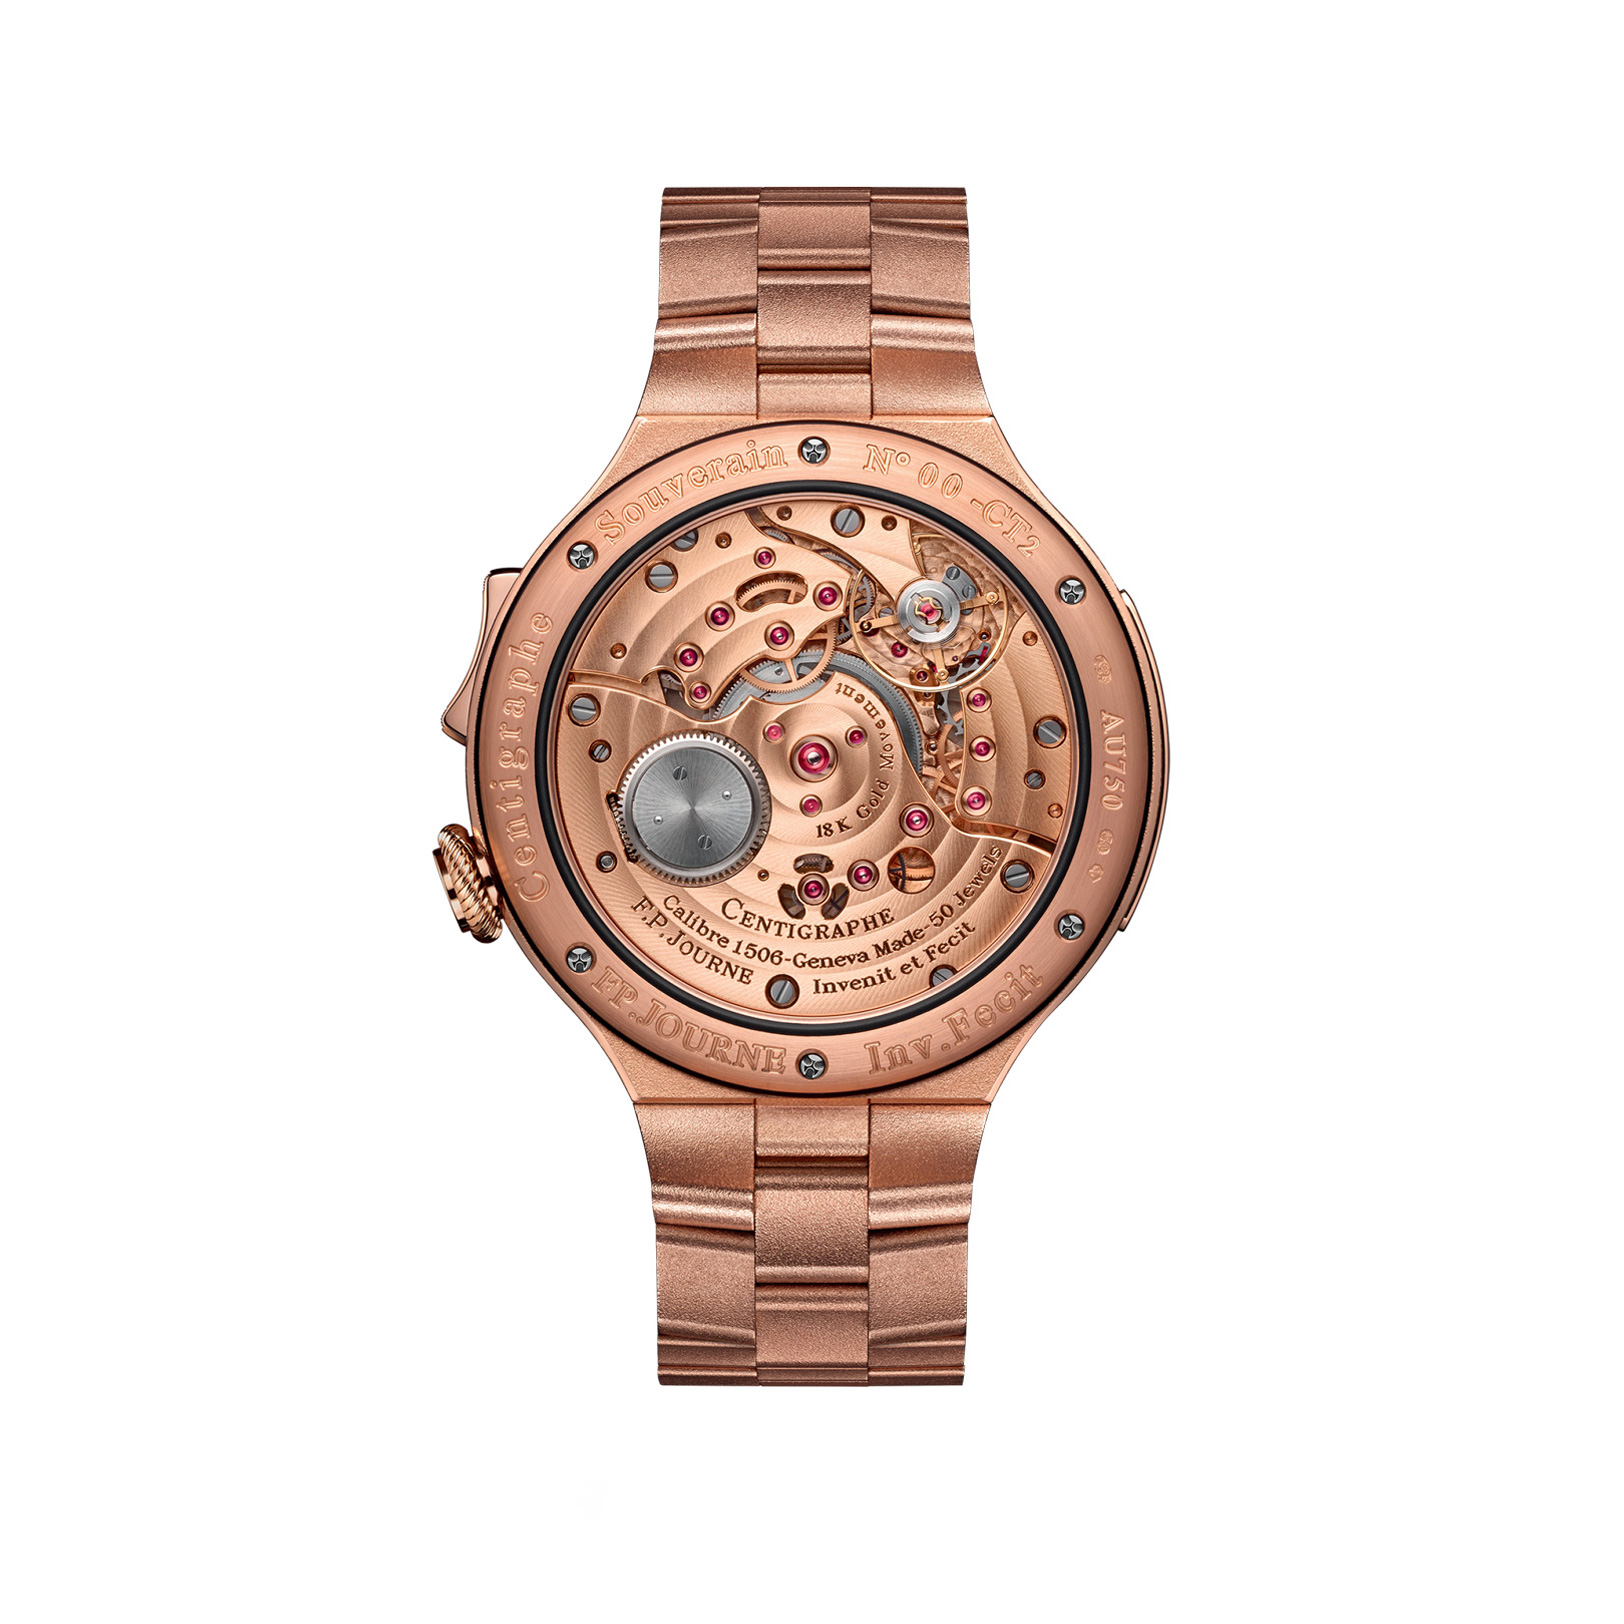 Centigraphe 44mm Red Gold gallery 1